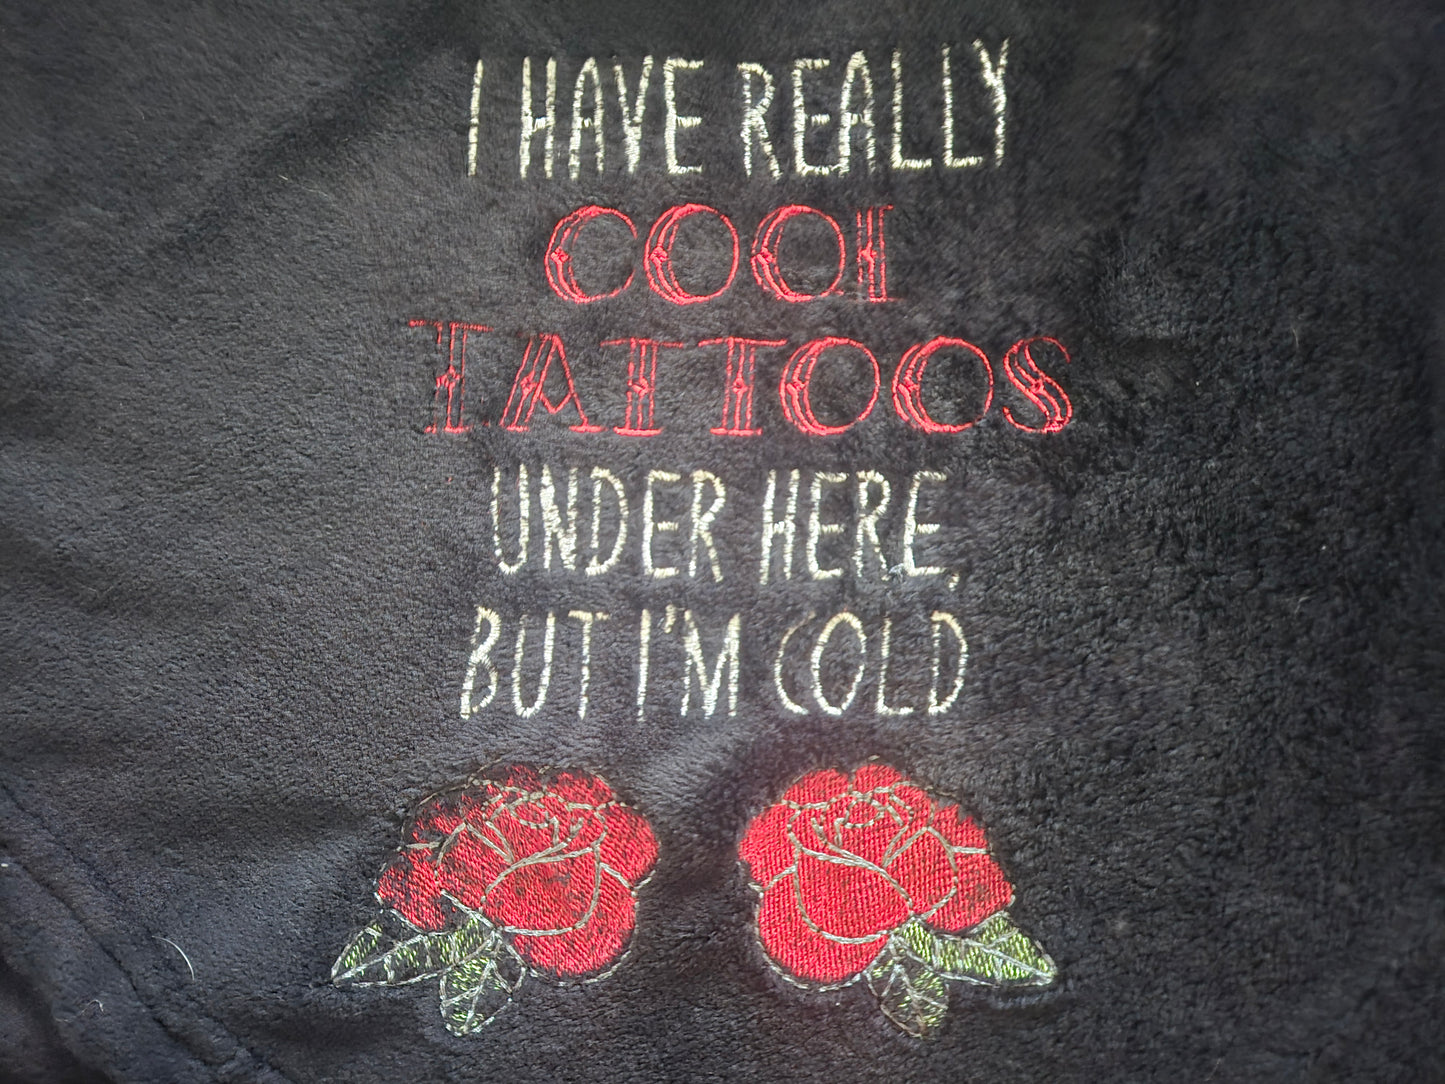 "I Have Really Cool Tattoos Under Here But I'm Cold" Velvet Plush Throw Blanket